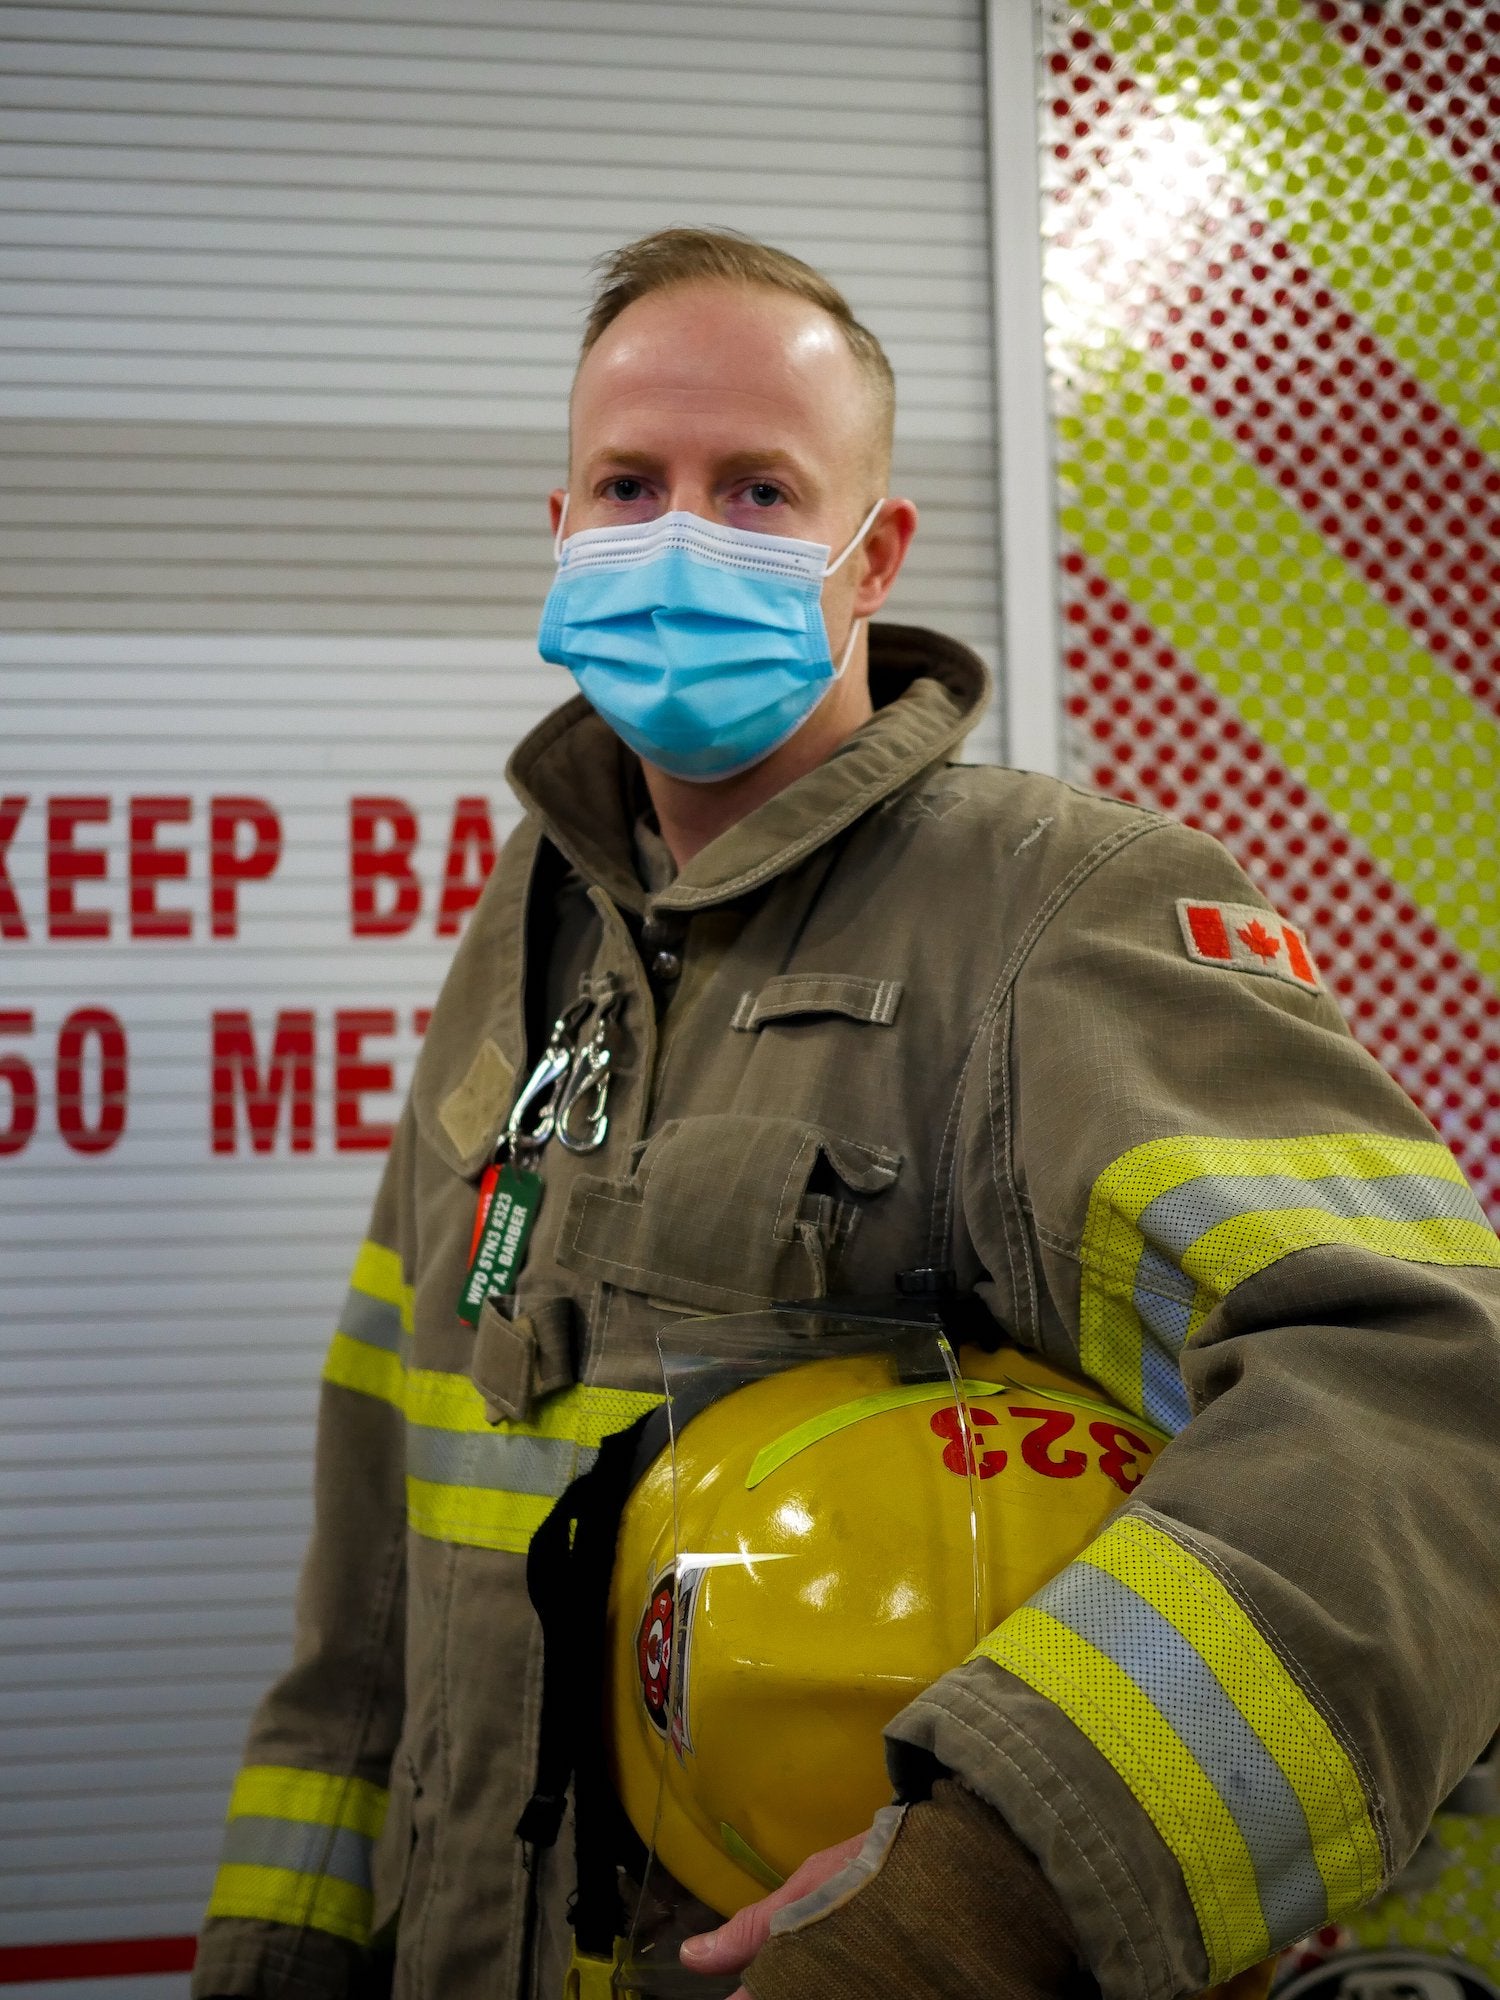 The Canadian Shield PPE for First Responders